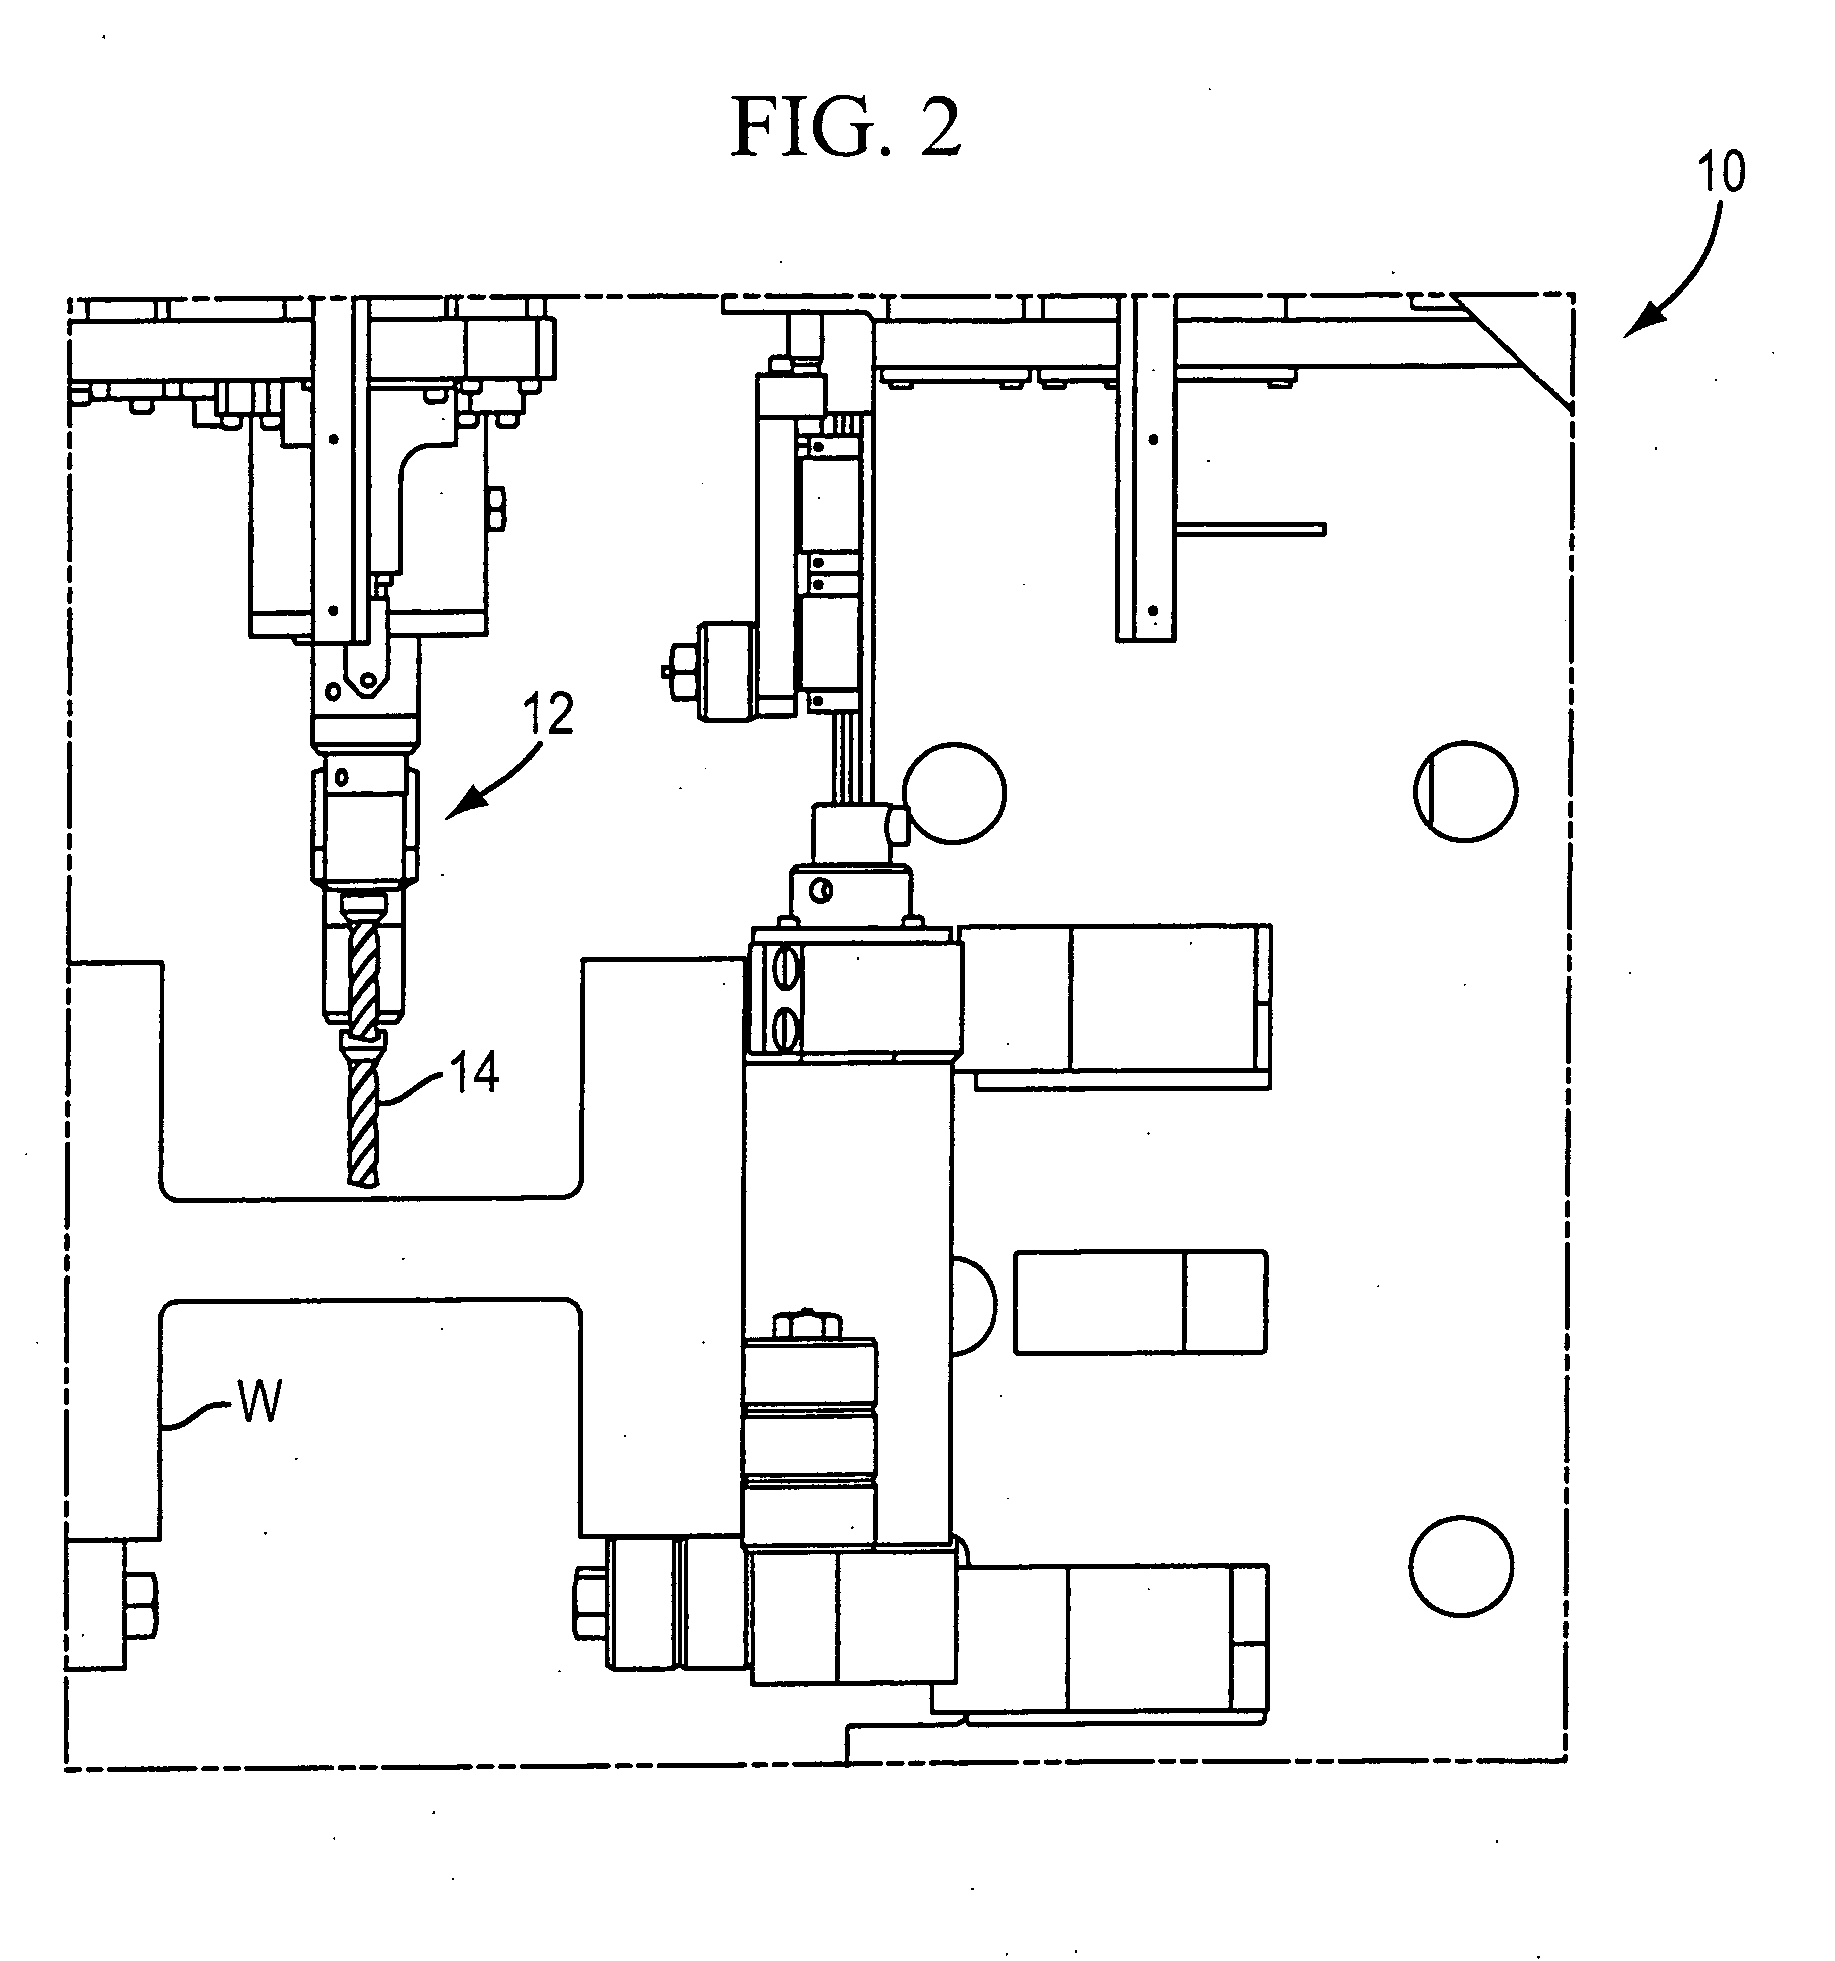 Method of drilling a workpiece